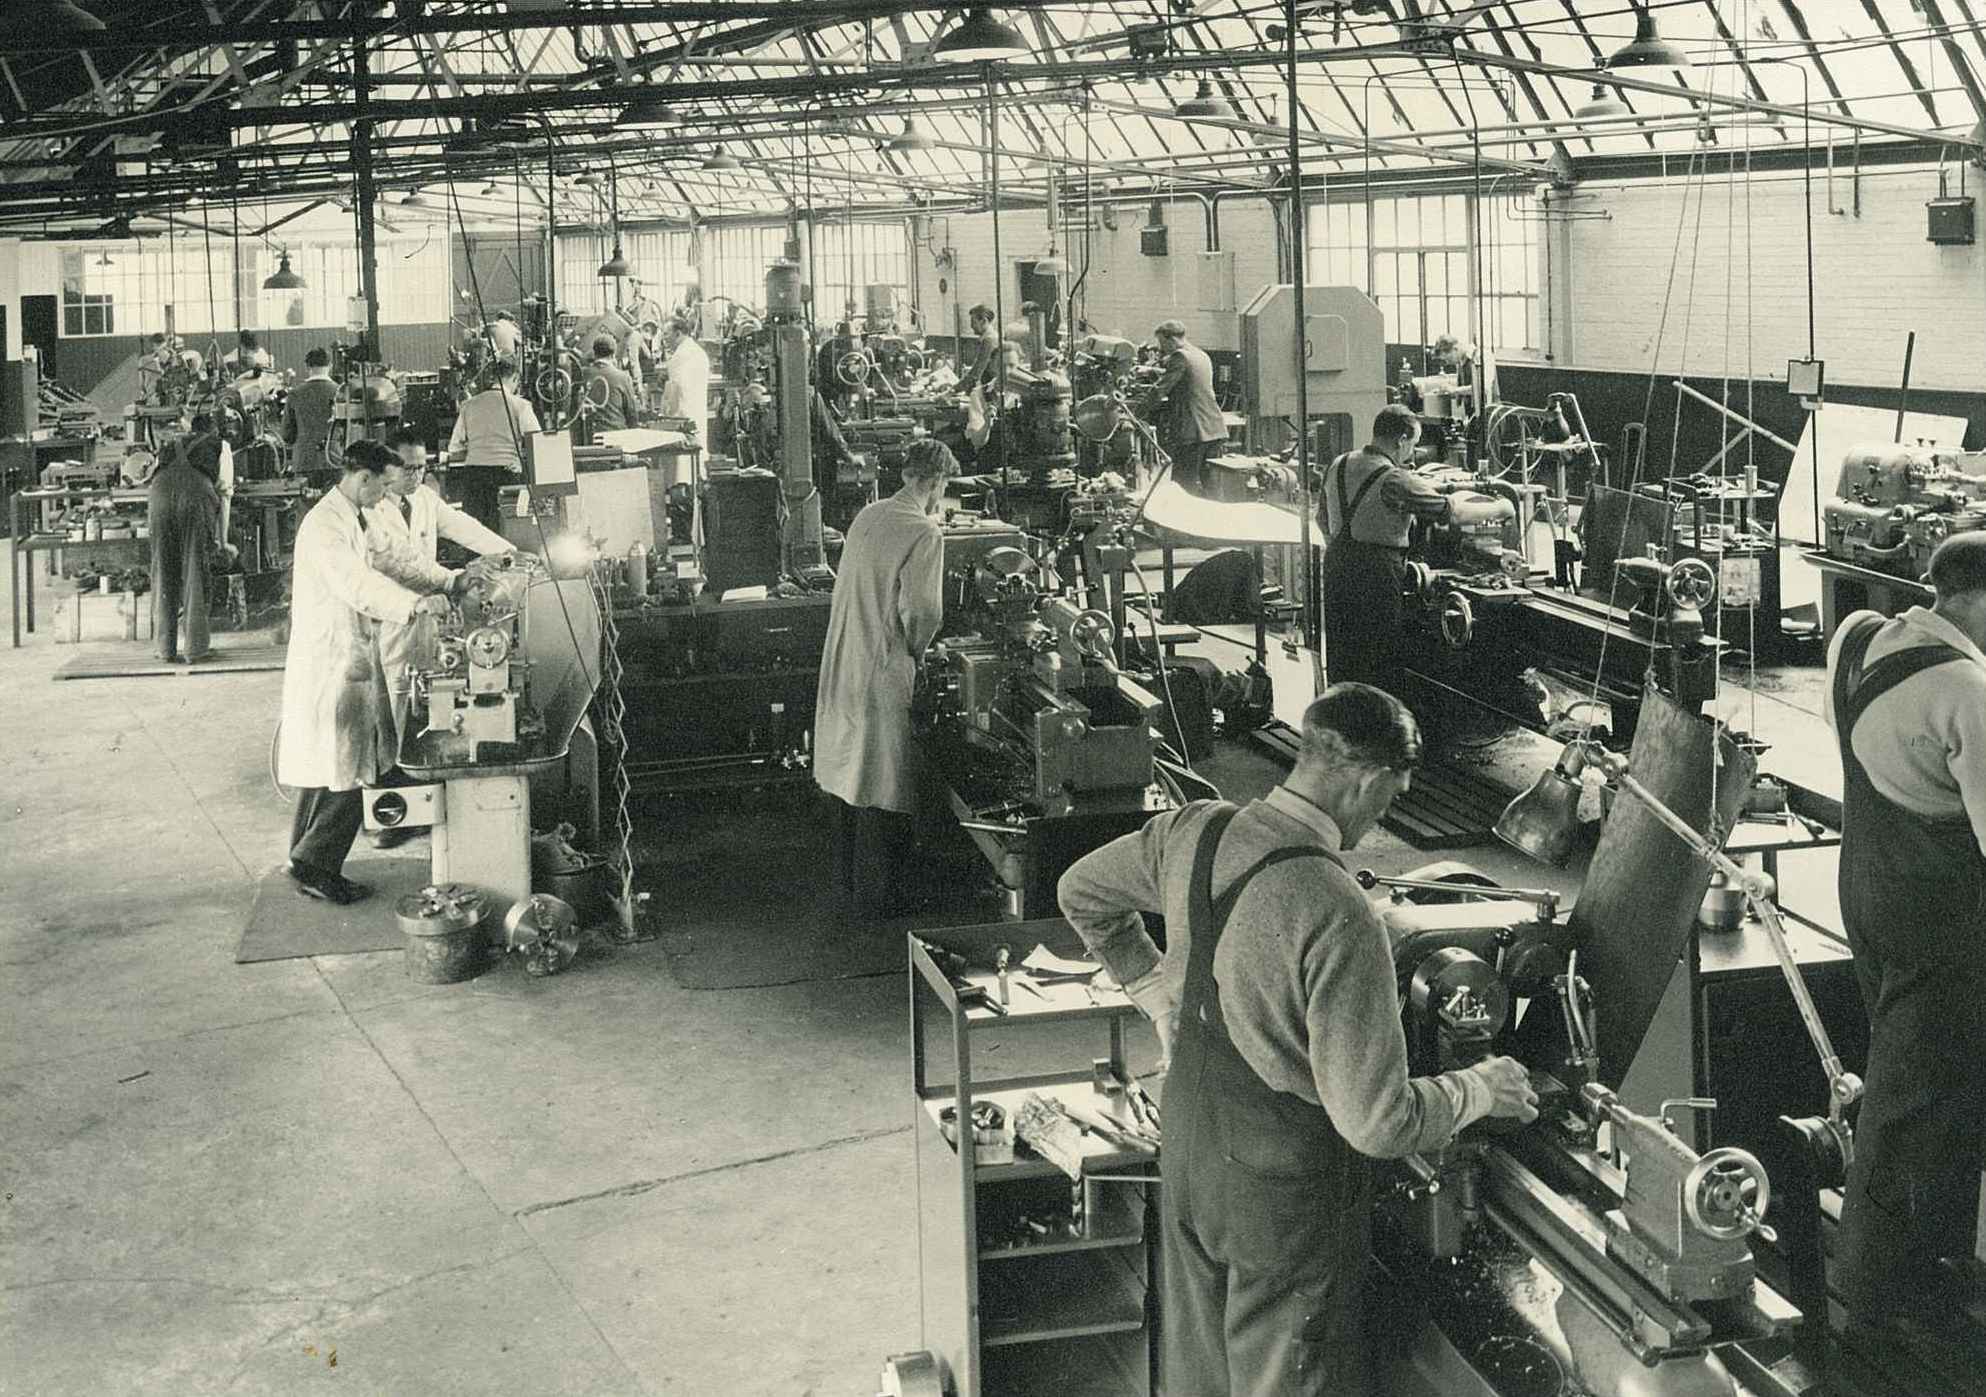 Engineering at the Enham Trust in the 1950s